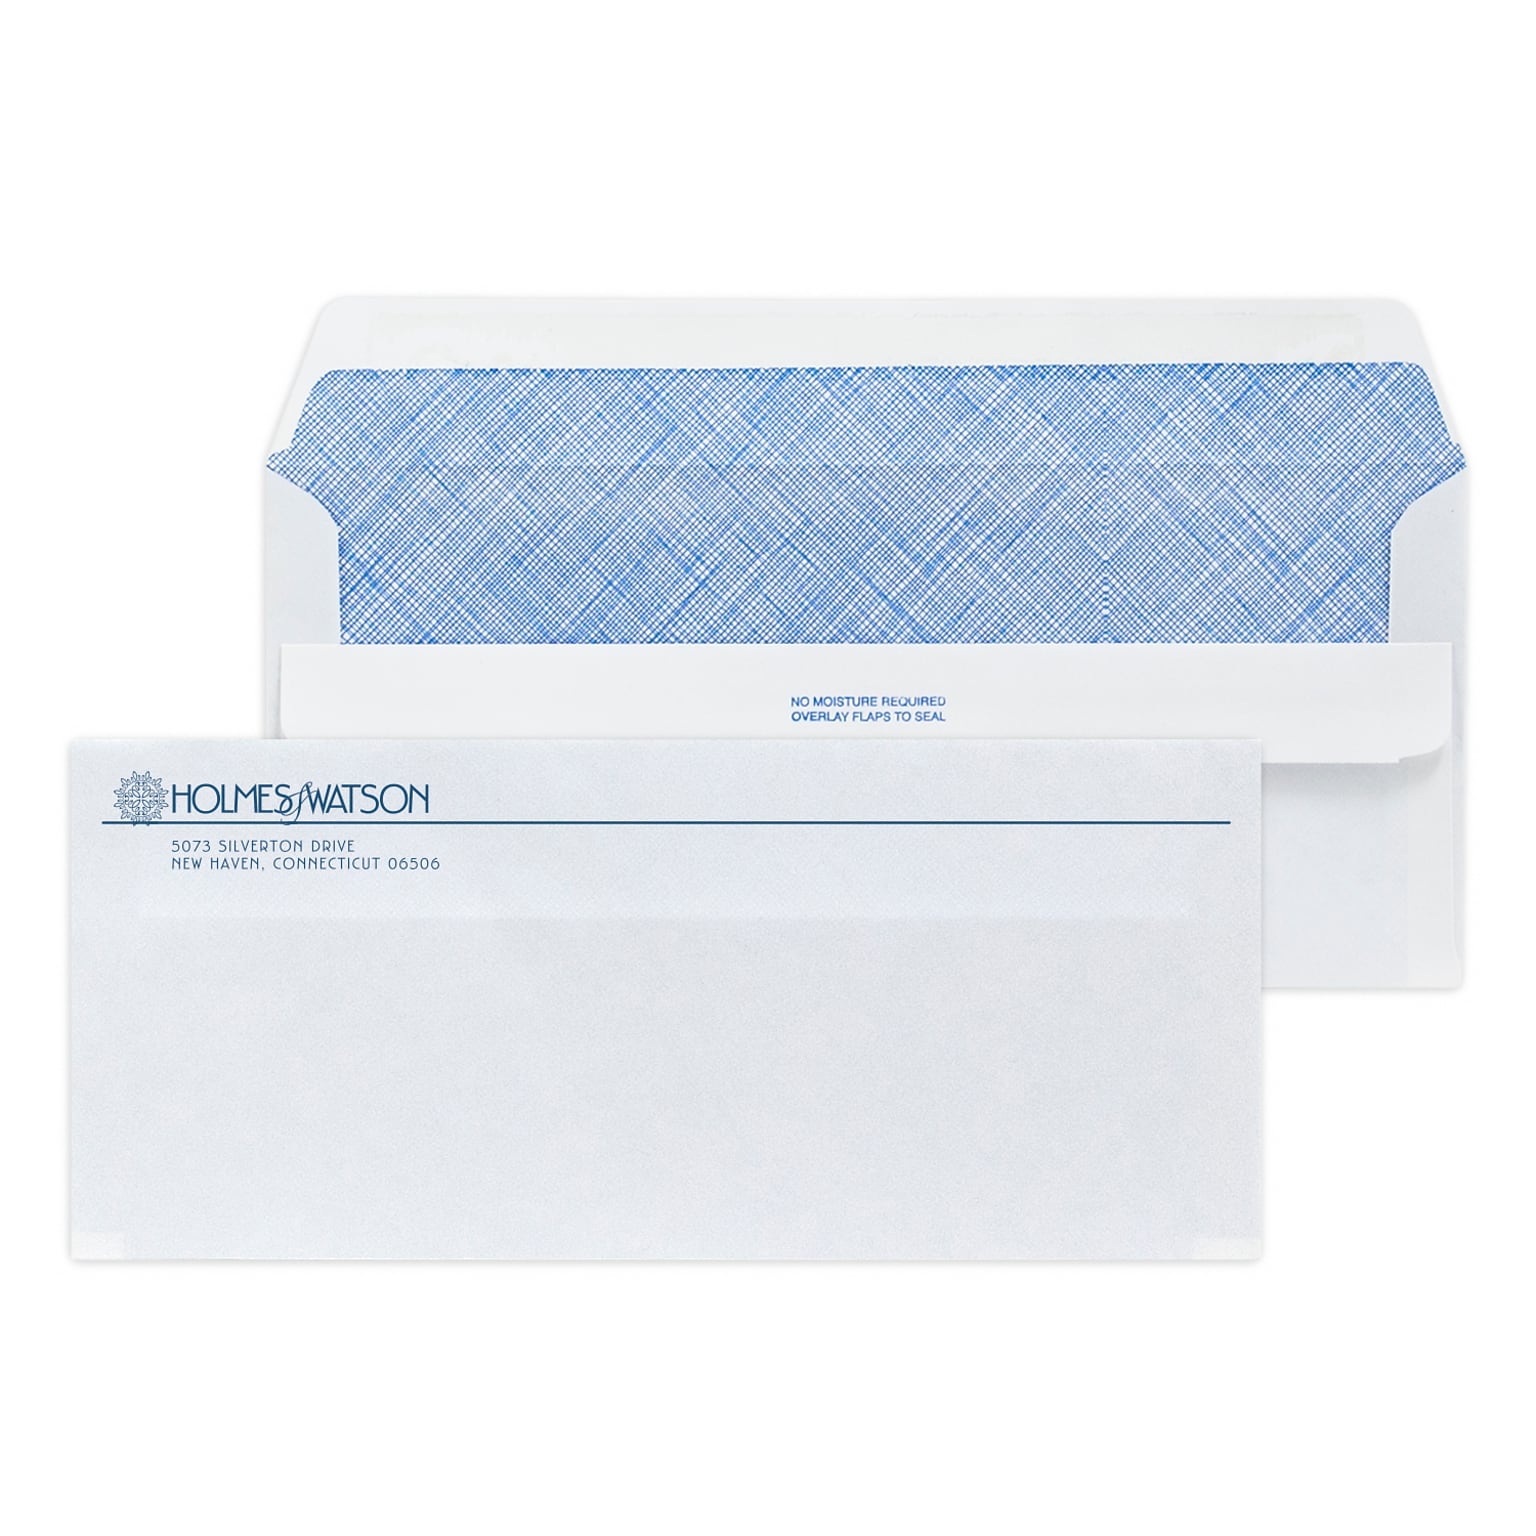 Custom #10 Self Seal Envelopes with Security Tint, 4 1/4 x 9 1/2, 24# White Wove, 1 Custom Ink, 250 / Pack